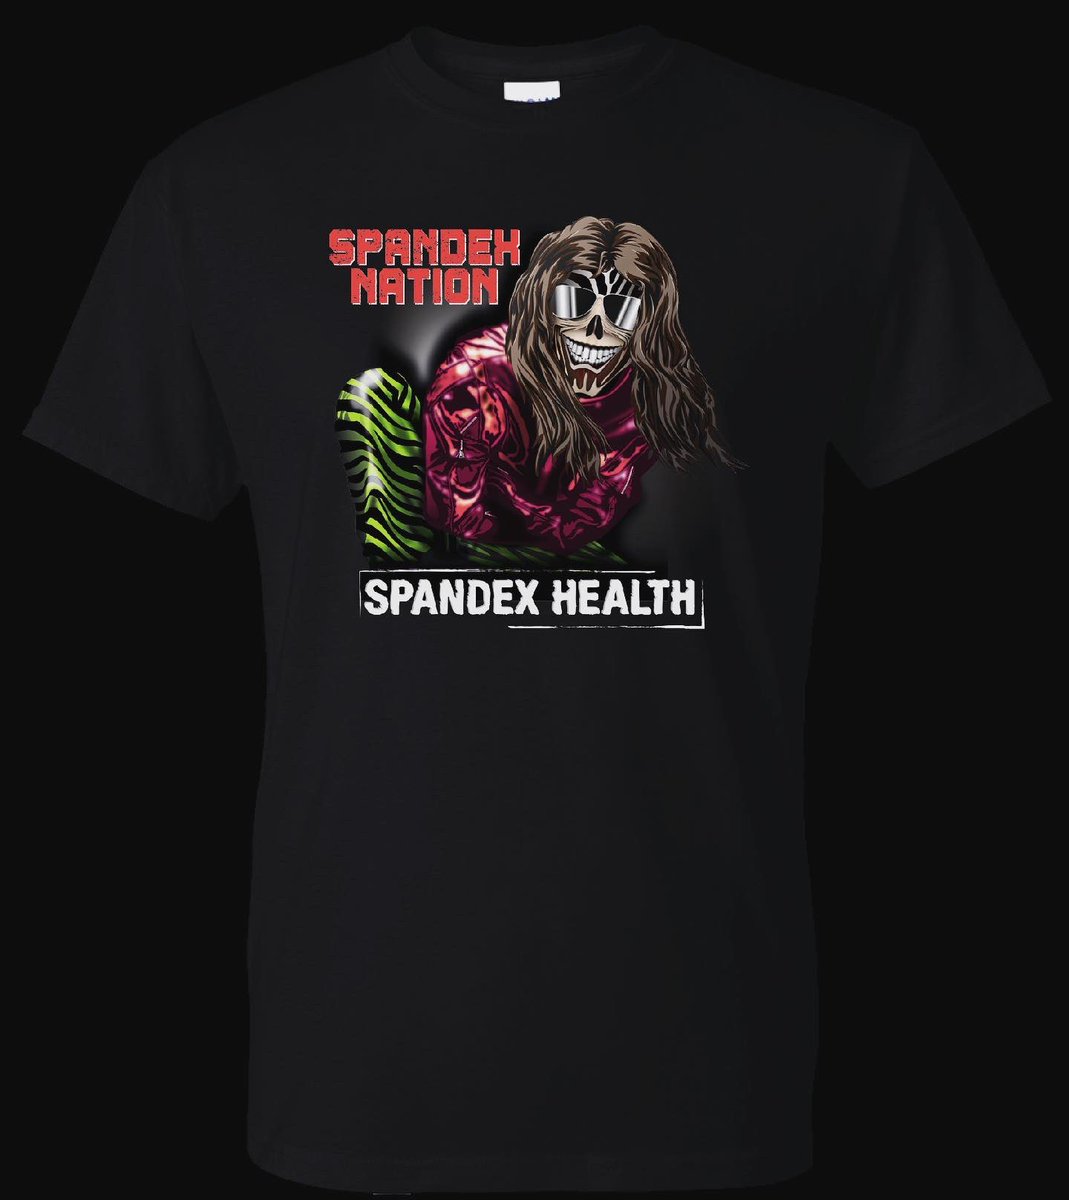 🚨NEW SPANSWAG ALERT 🚨 BANG YOUR HEADS with the new “Spandex Health” shirt at our booth this week!!! #spandexnation #spanswag #metalhealth #newmerch #bangyourhead #80sclassicalbums #80s #hardrock #heavymetal #tributeband #vegas